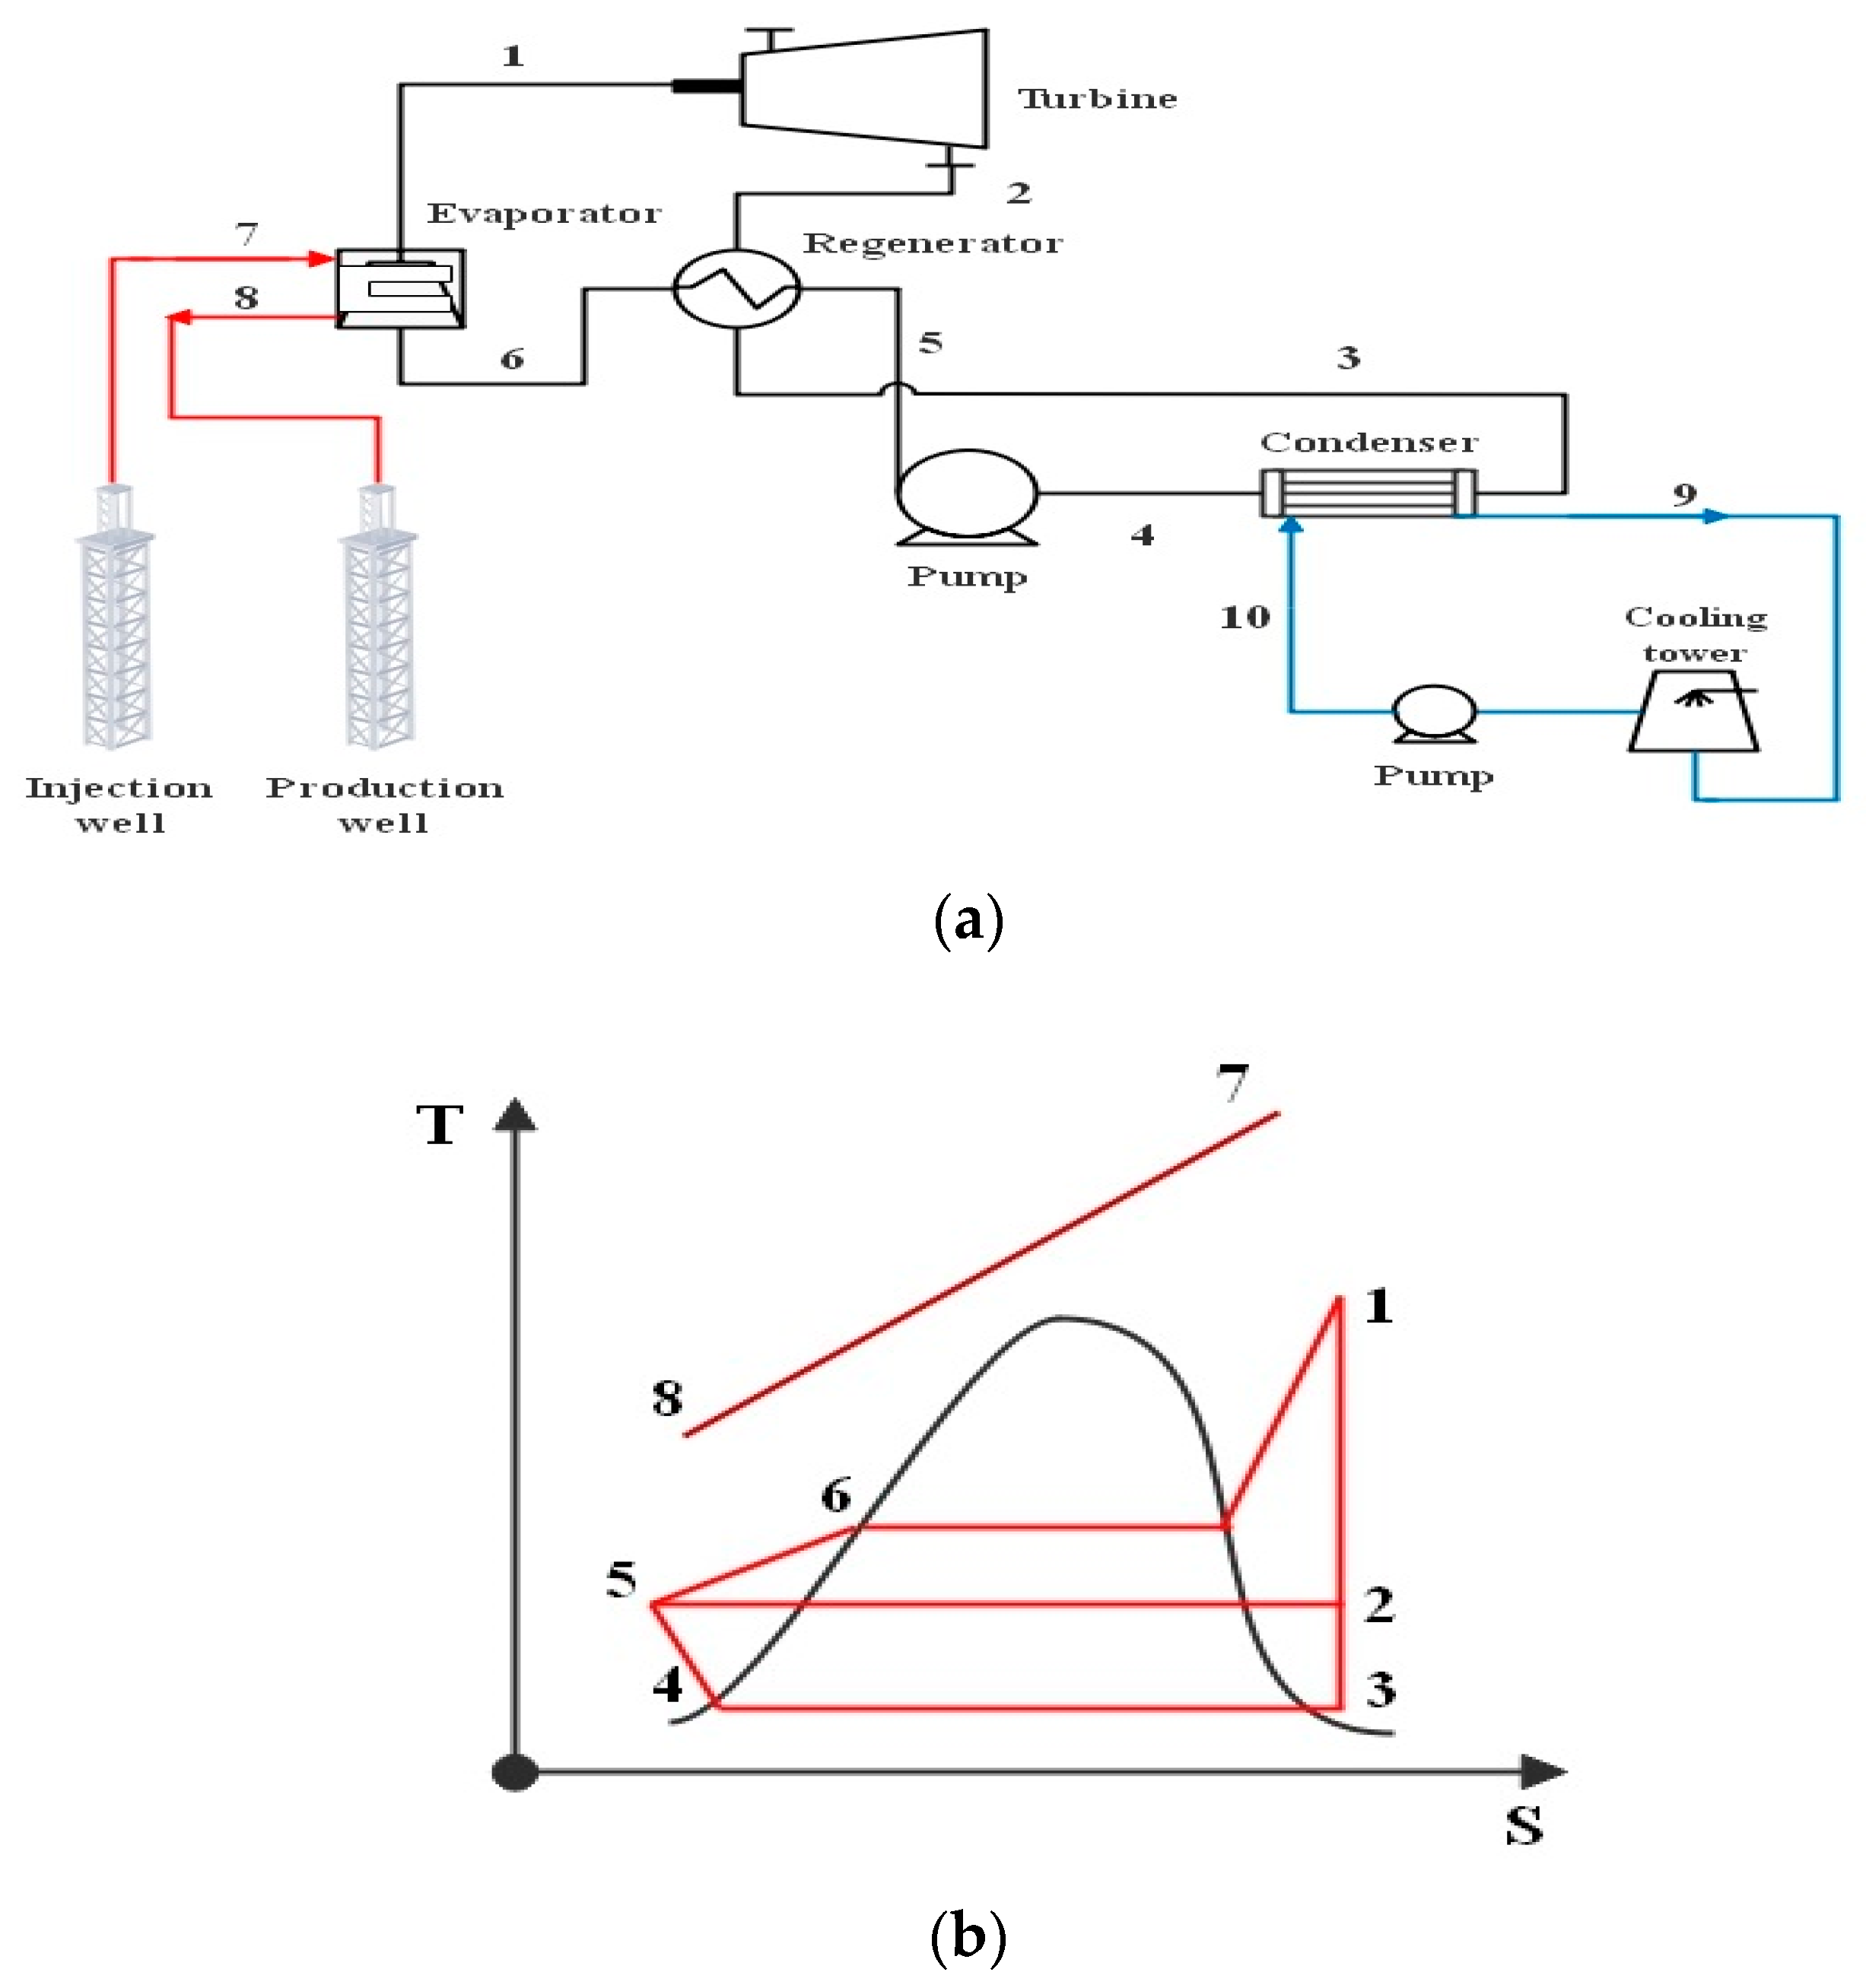 A schematic presentation of the main algorithms of the STEAM model. The